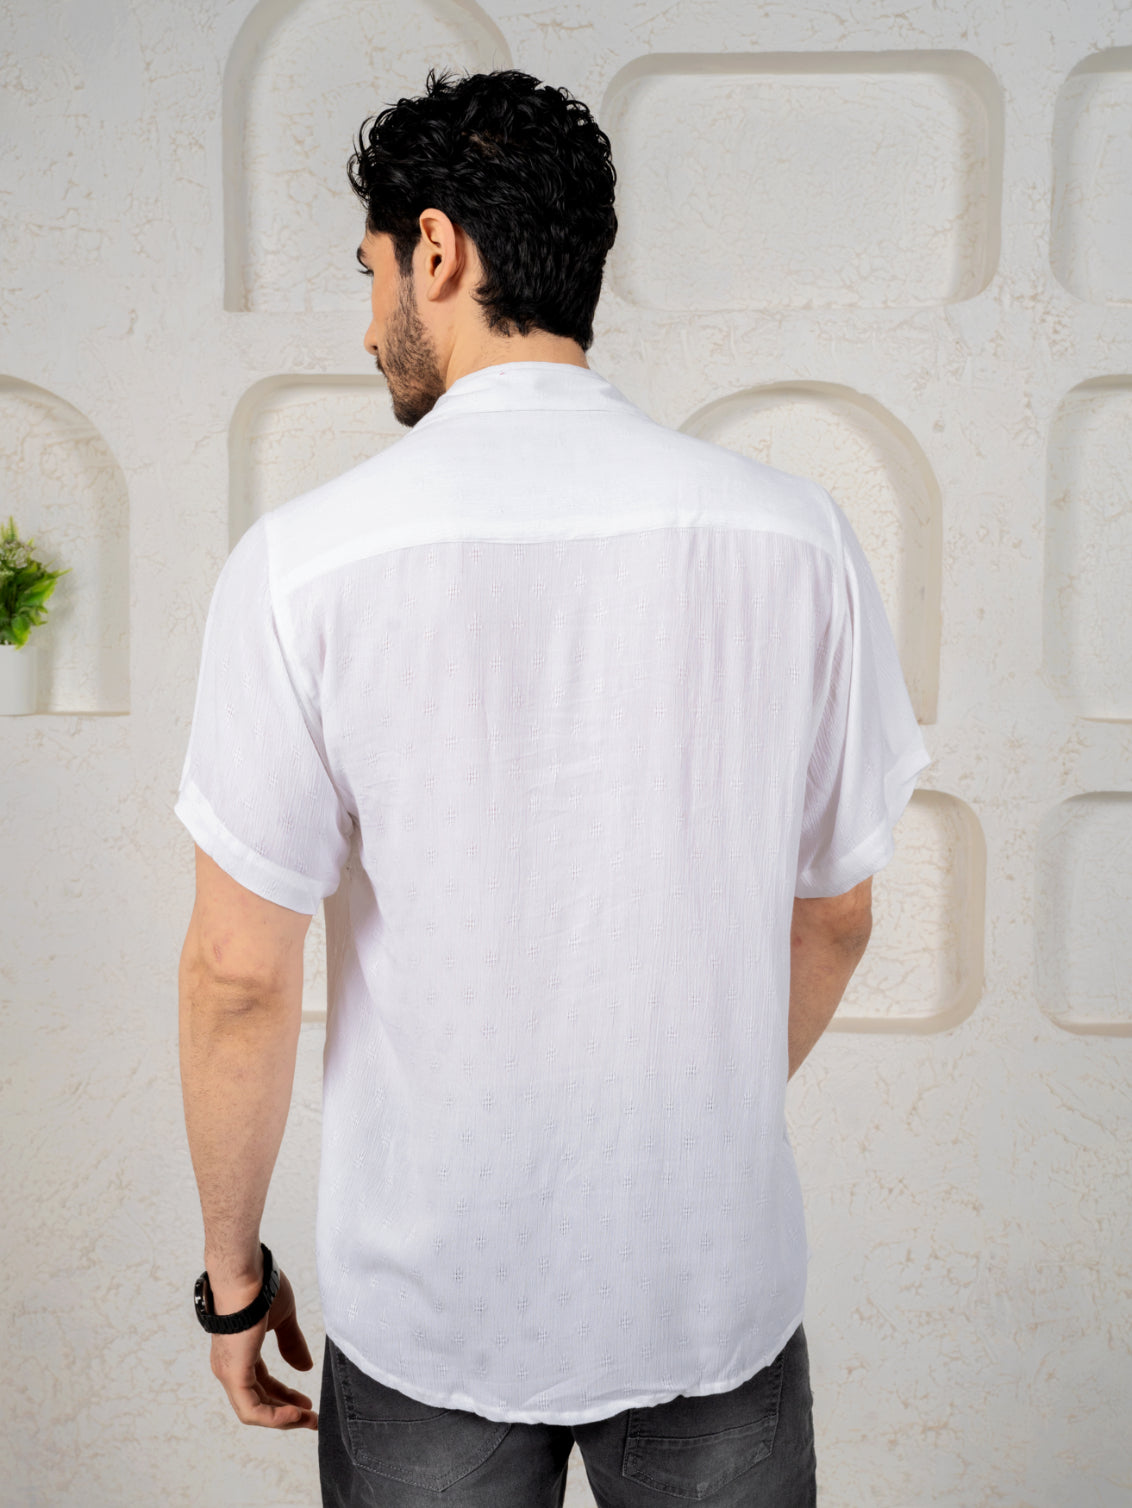 Firangi Yarn Relaxed Fit Solid Self Design Super Flowy Re-engineered Cotton- Half Sleeves Party Shirt Super White